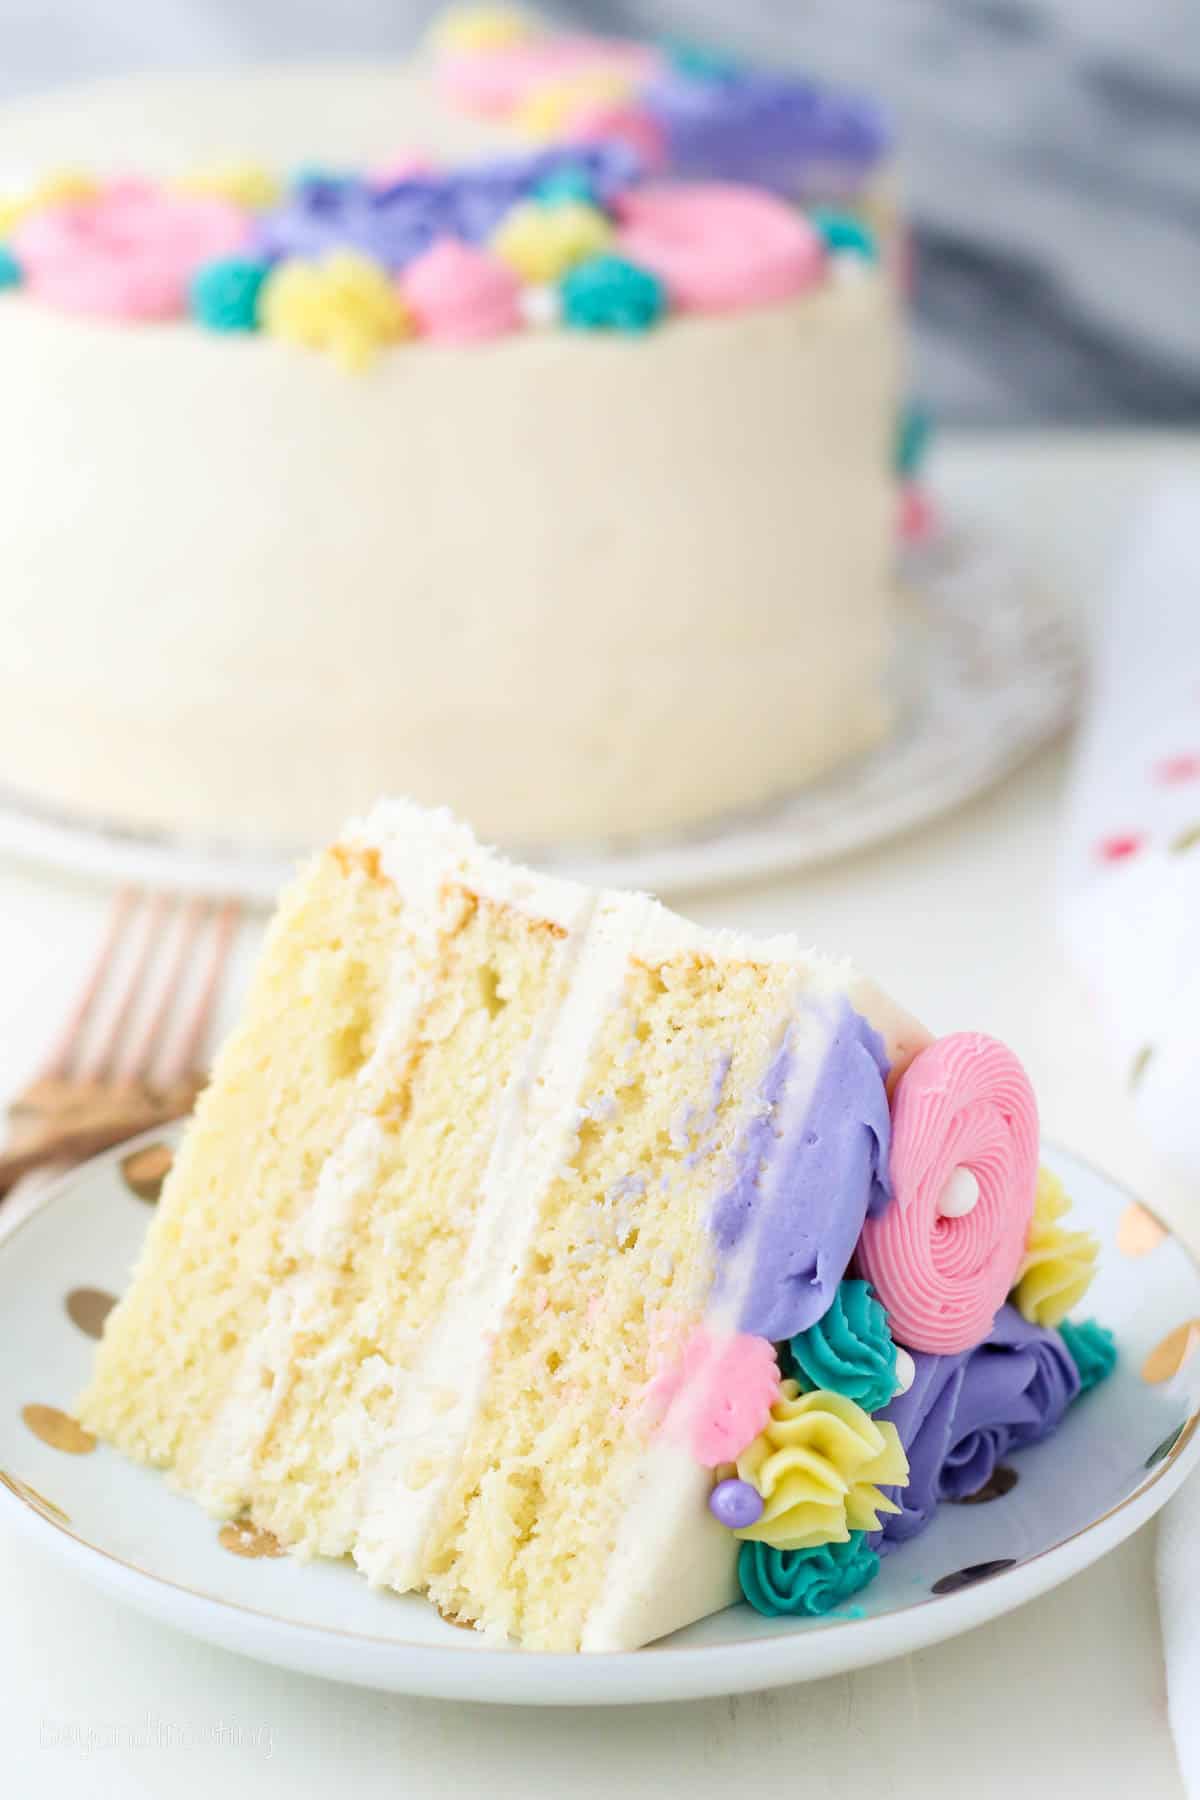 A slice of buttercream flower cake on a plate with the rest of the cake in the background.